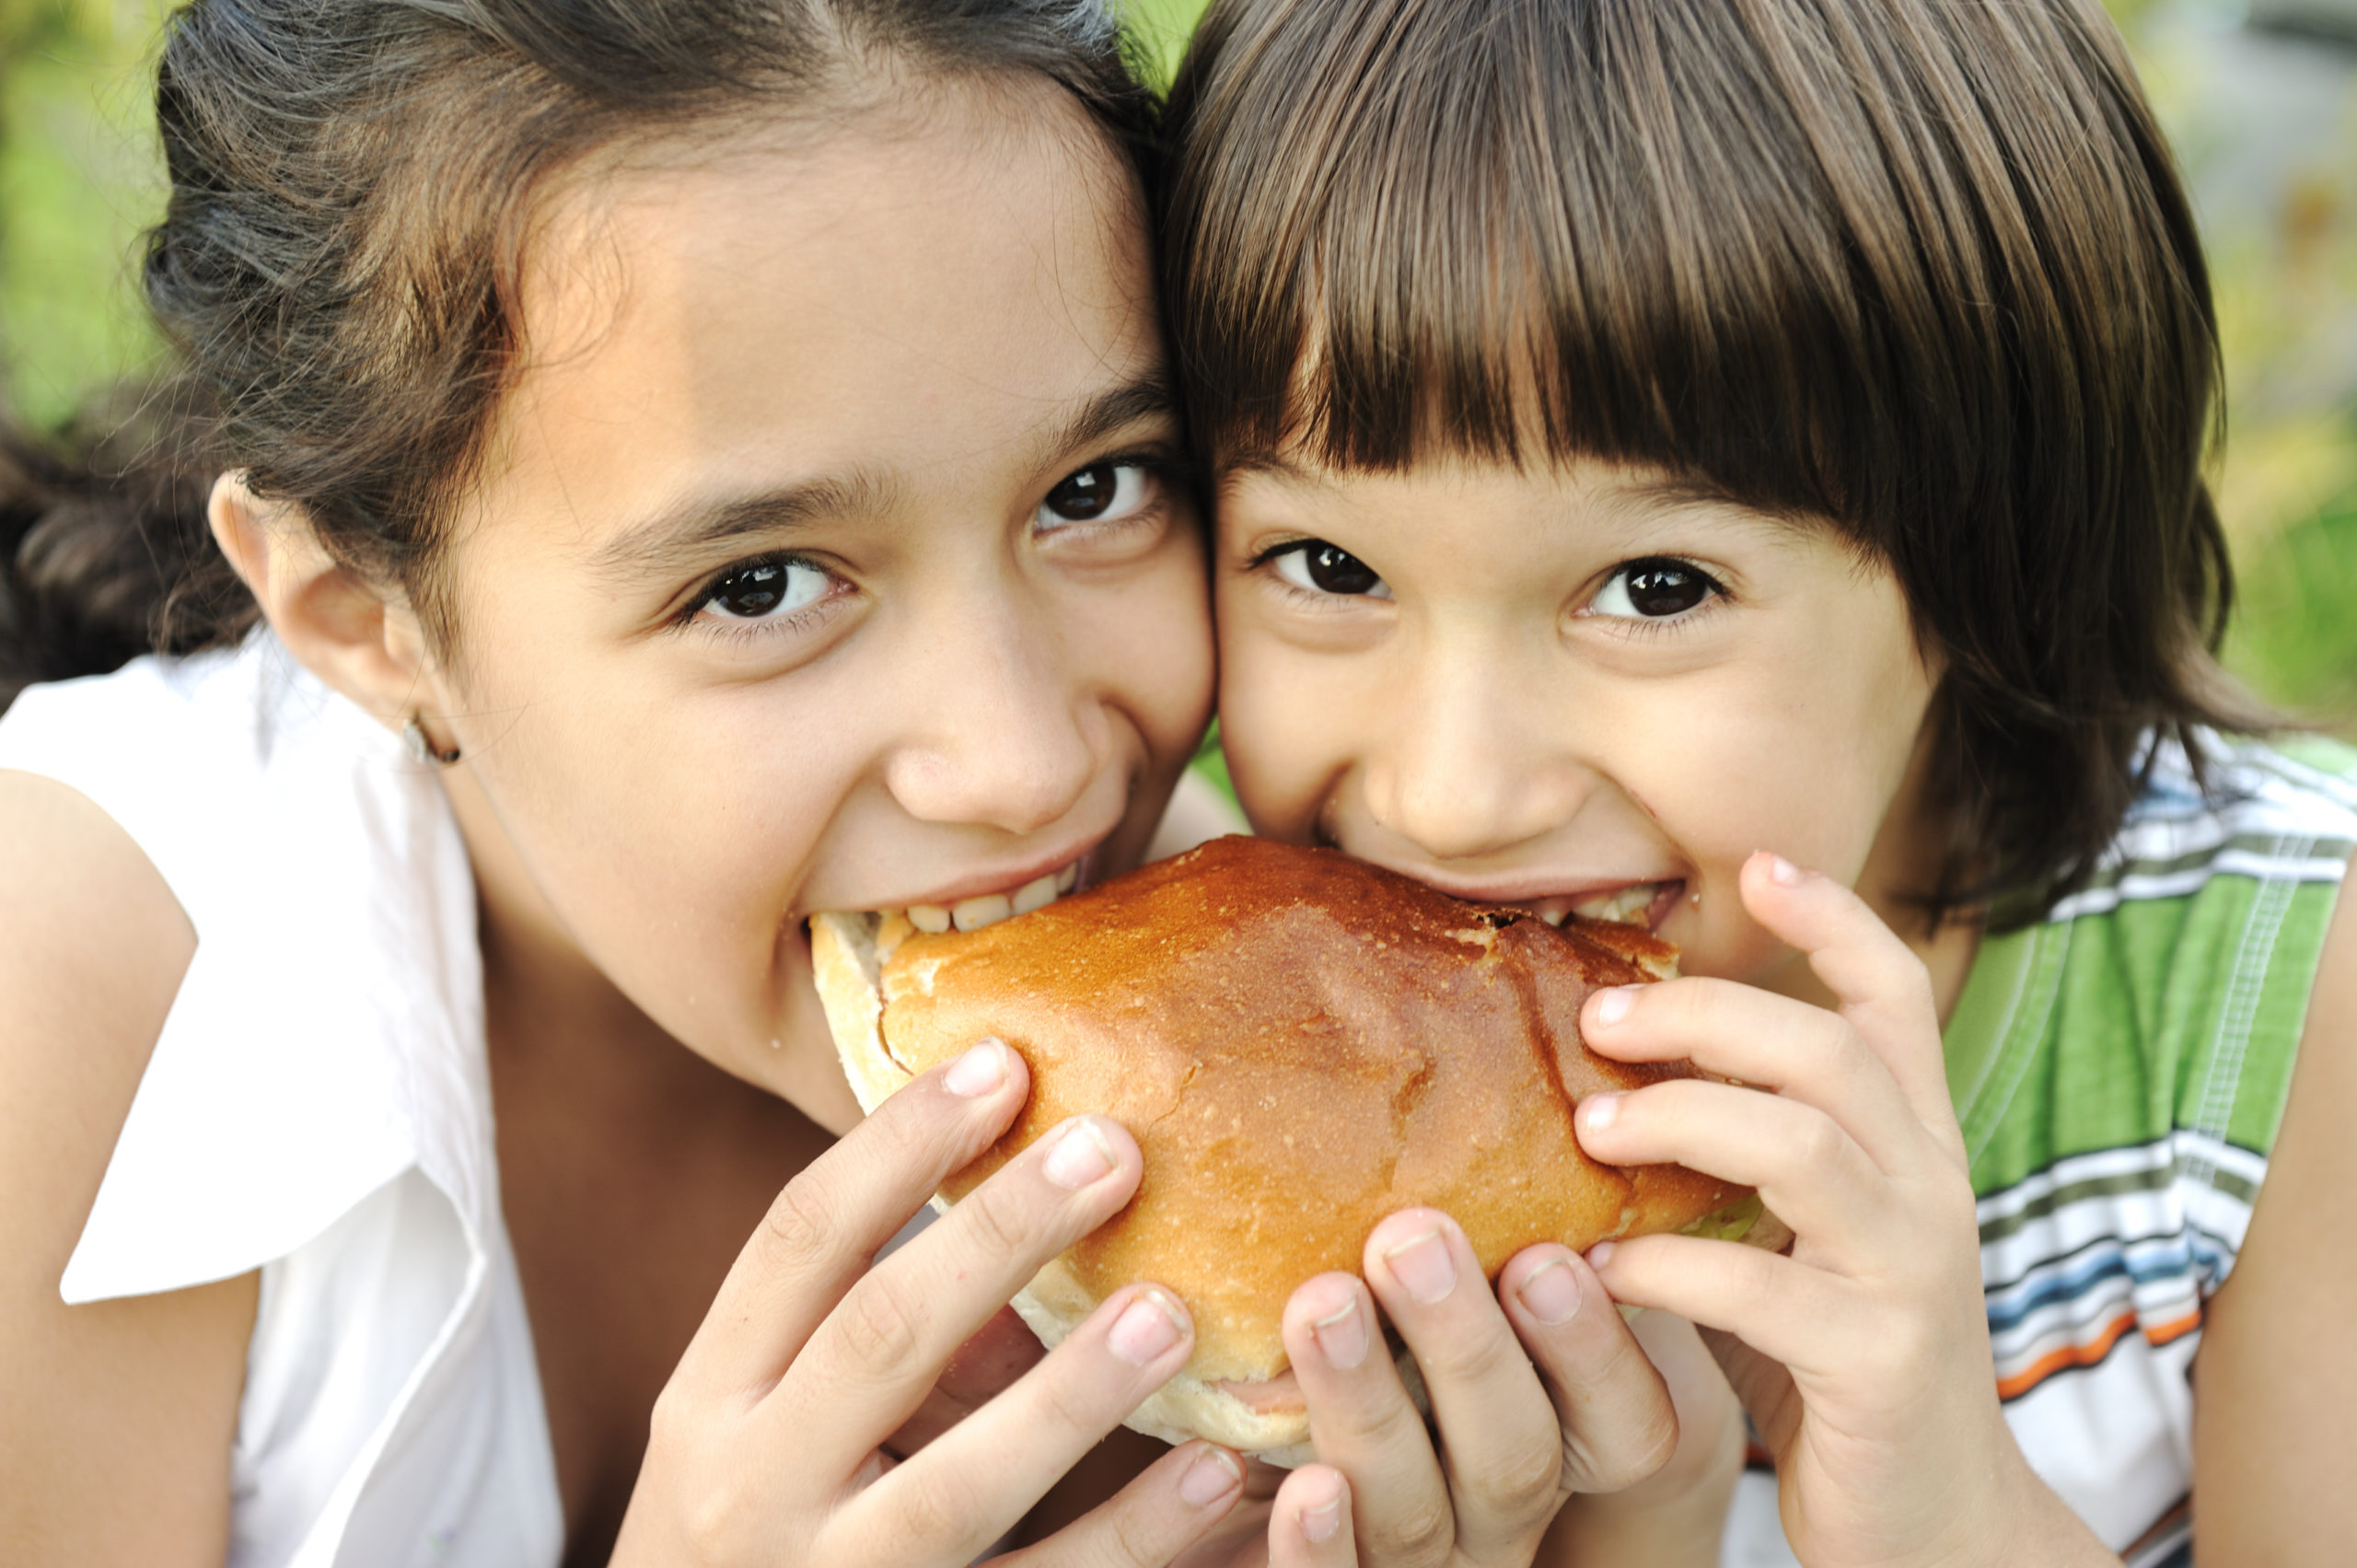 Closeup of two children eating sandwich in nature together, healthy food, careless and love